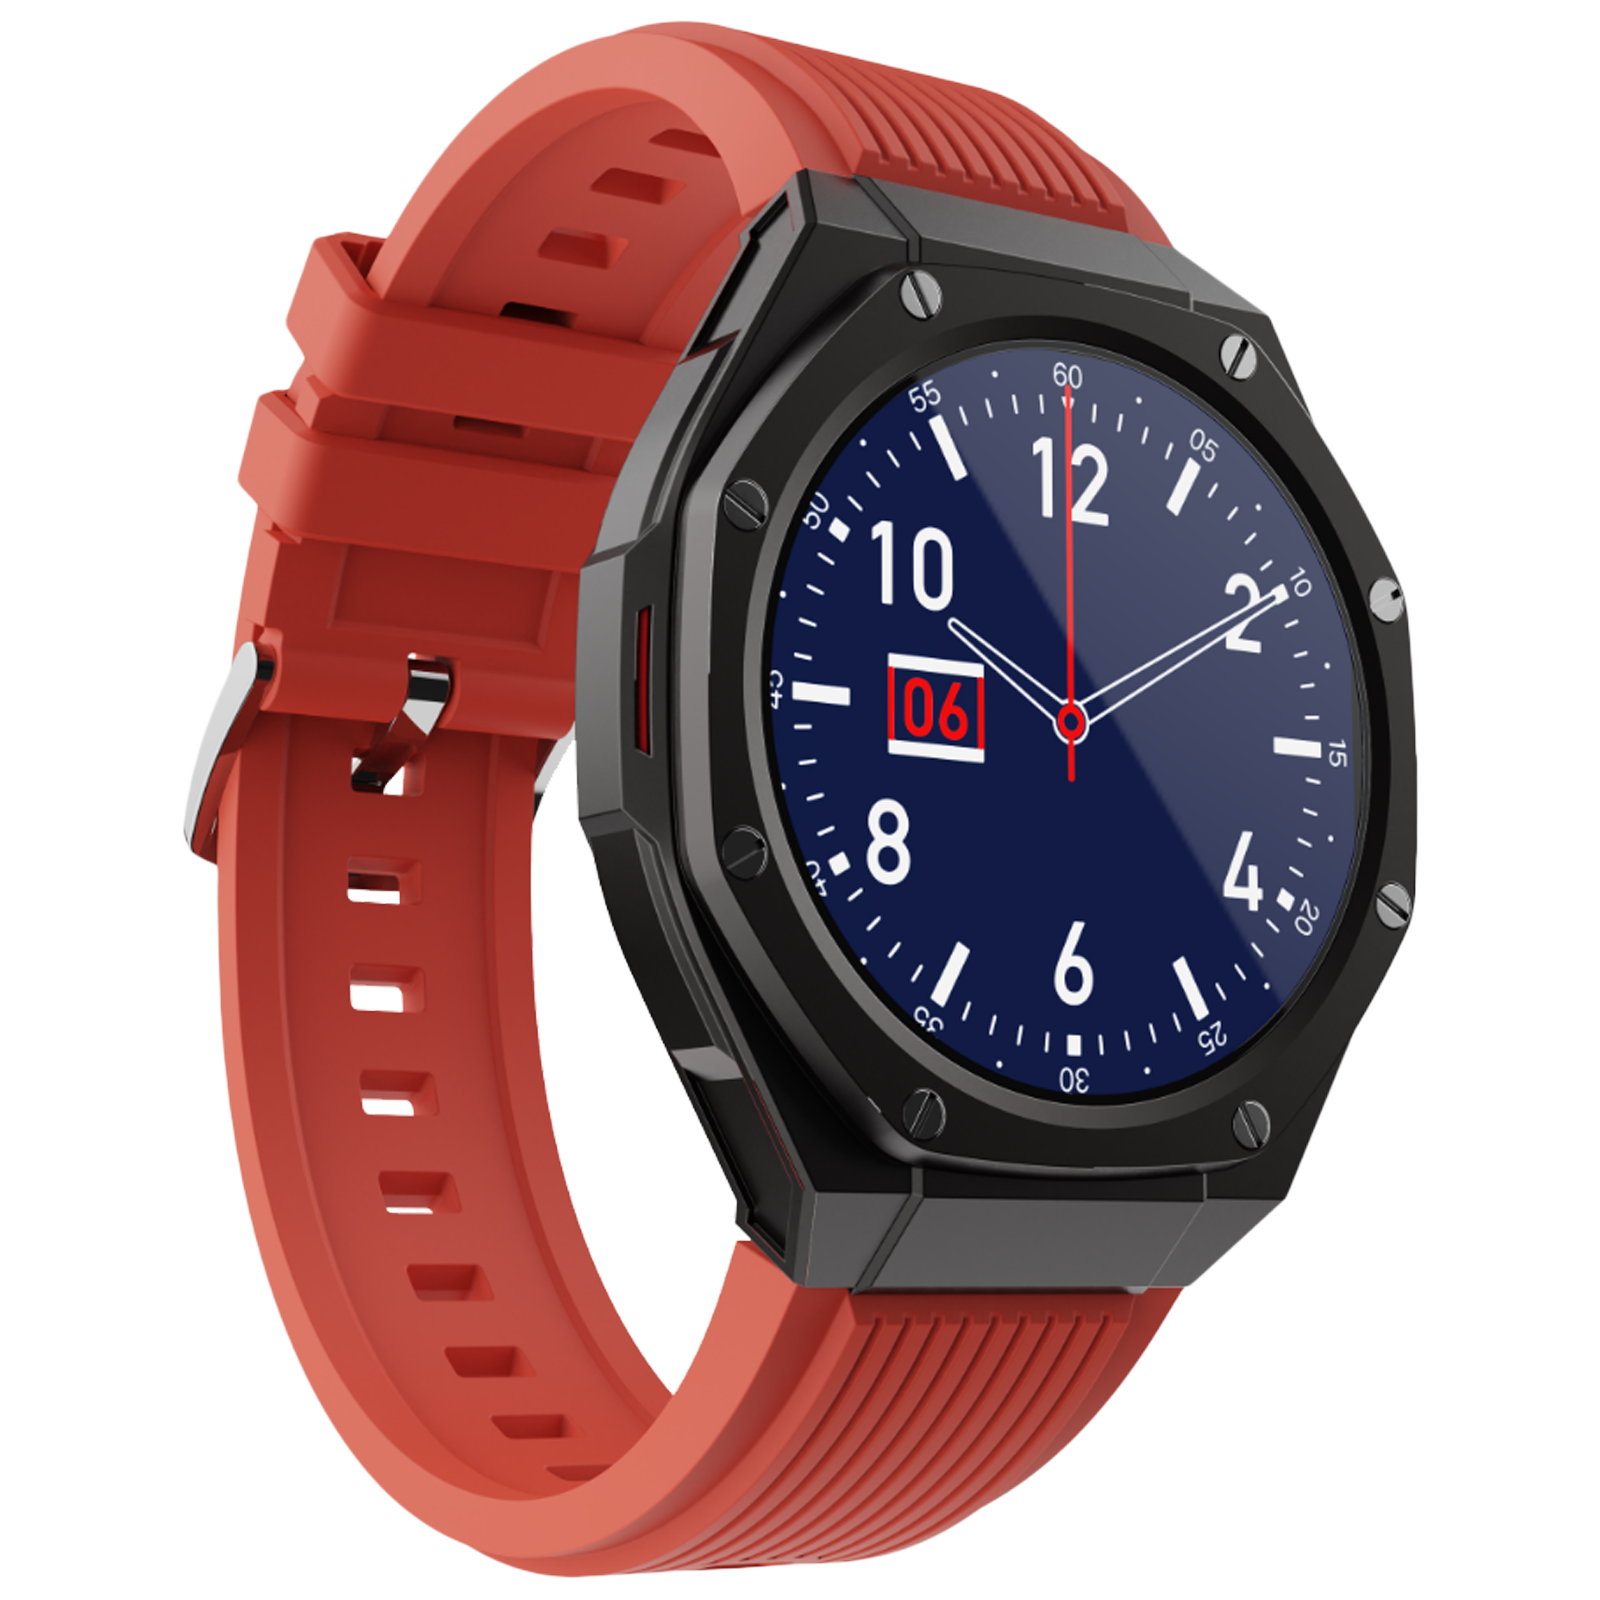 Buy boAt Enigma X600 Smartwatch with Bluetooth Calling (42mm, AMOLED  Display, IP68 Water Resistant, Royal Orange Strap) Online - Croma